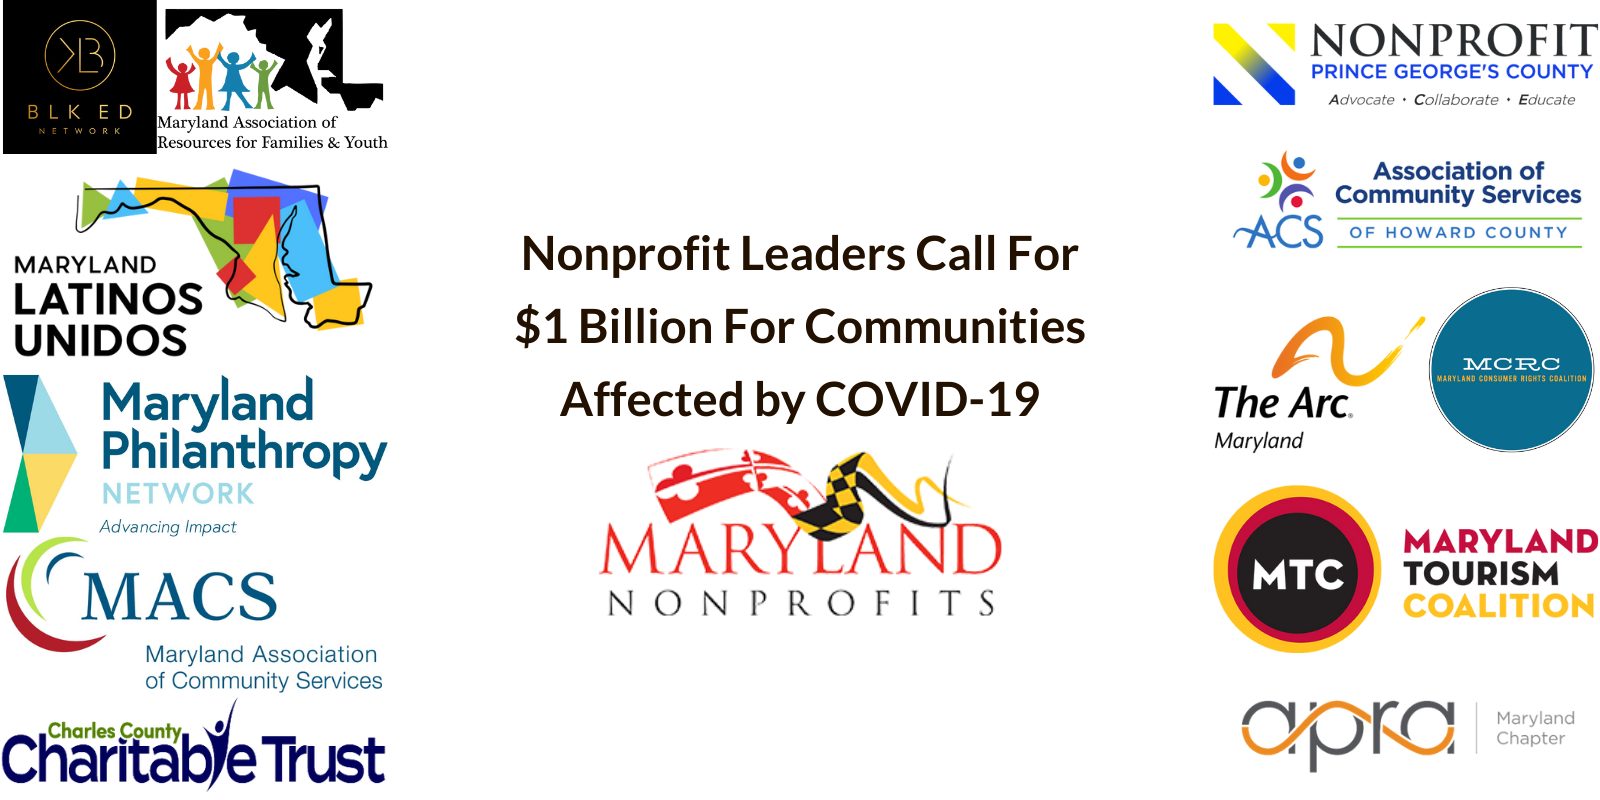 Nonprofit Leaders Call For $1 Billion For Communities Affected by COVID-19